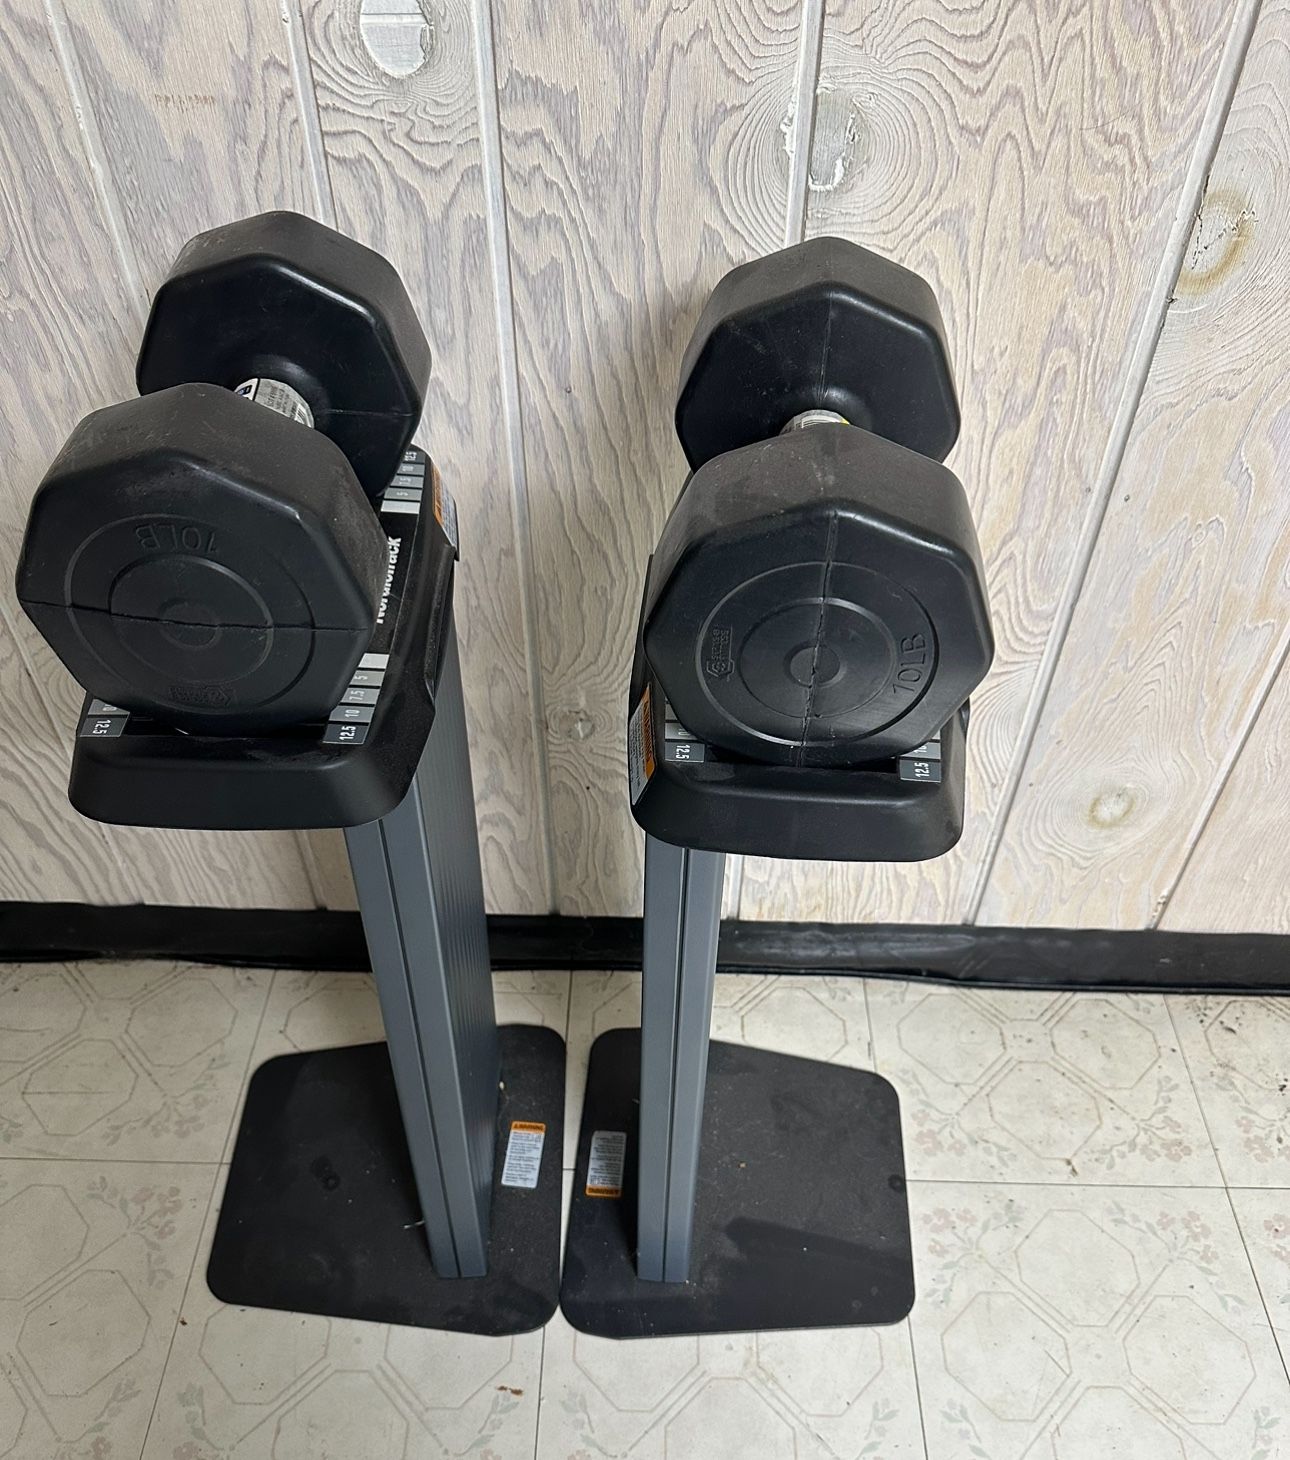 10 Pound Dumbbell set with stand